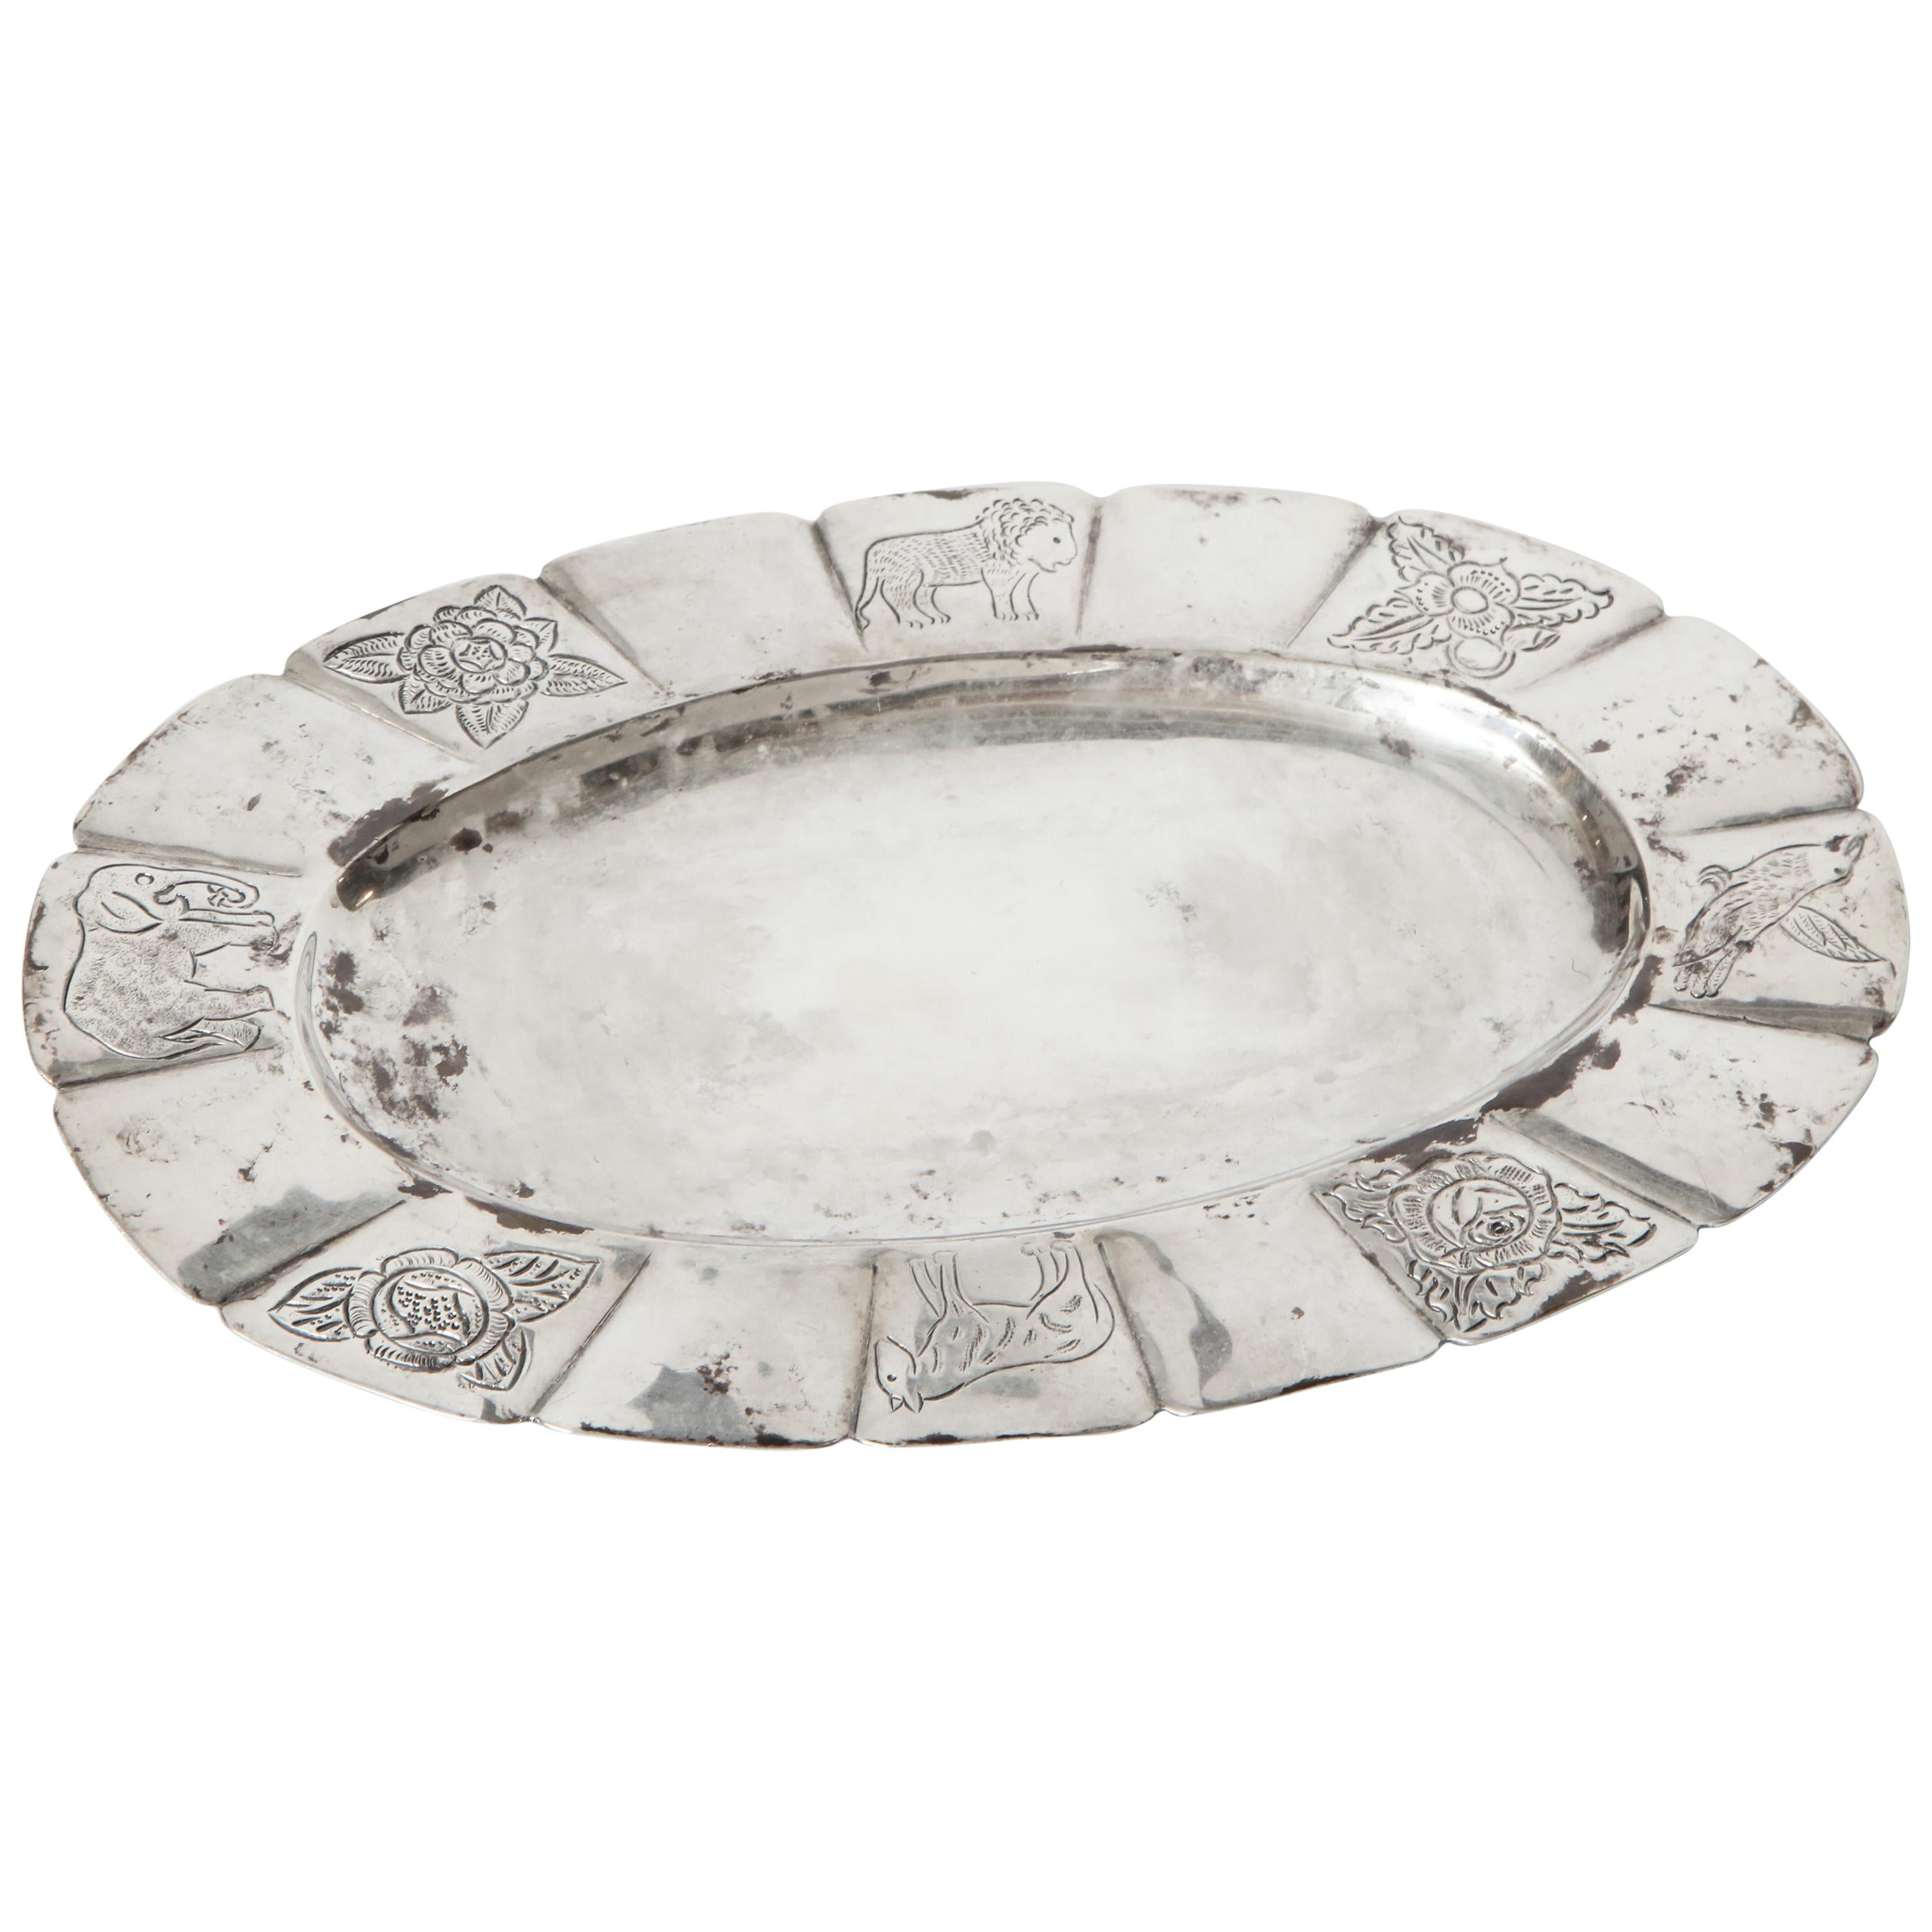 1950s Mexican Sterling Oval Dish Hand-Engraved with Flora and Fauna